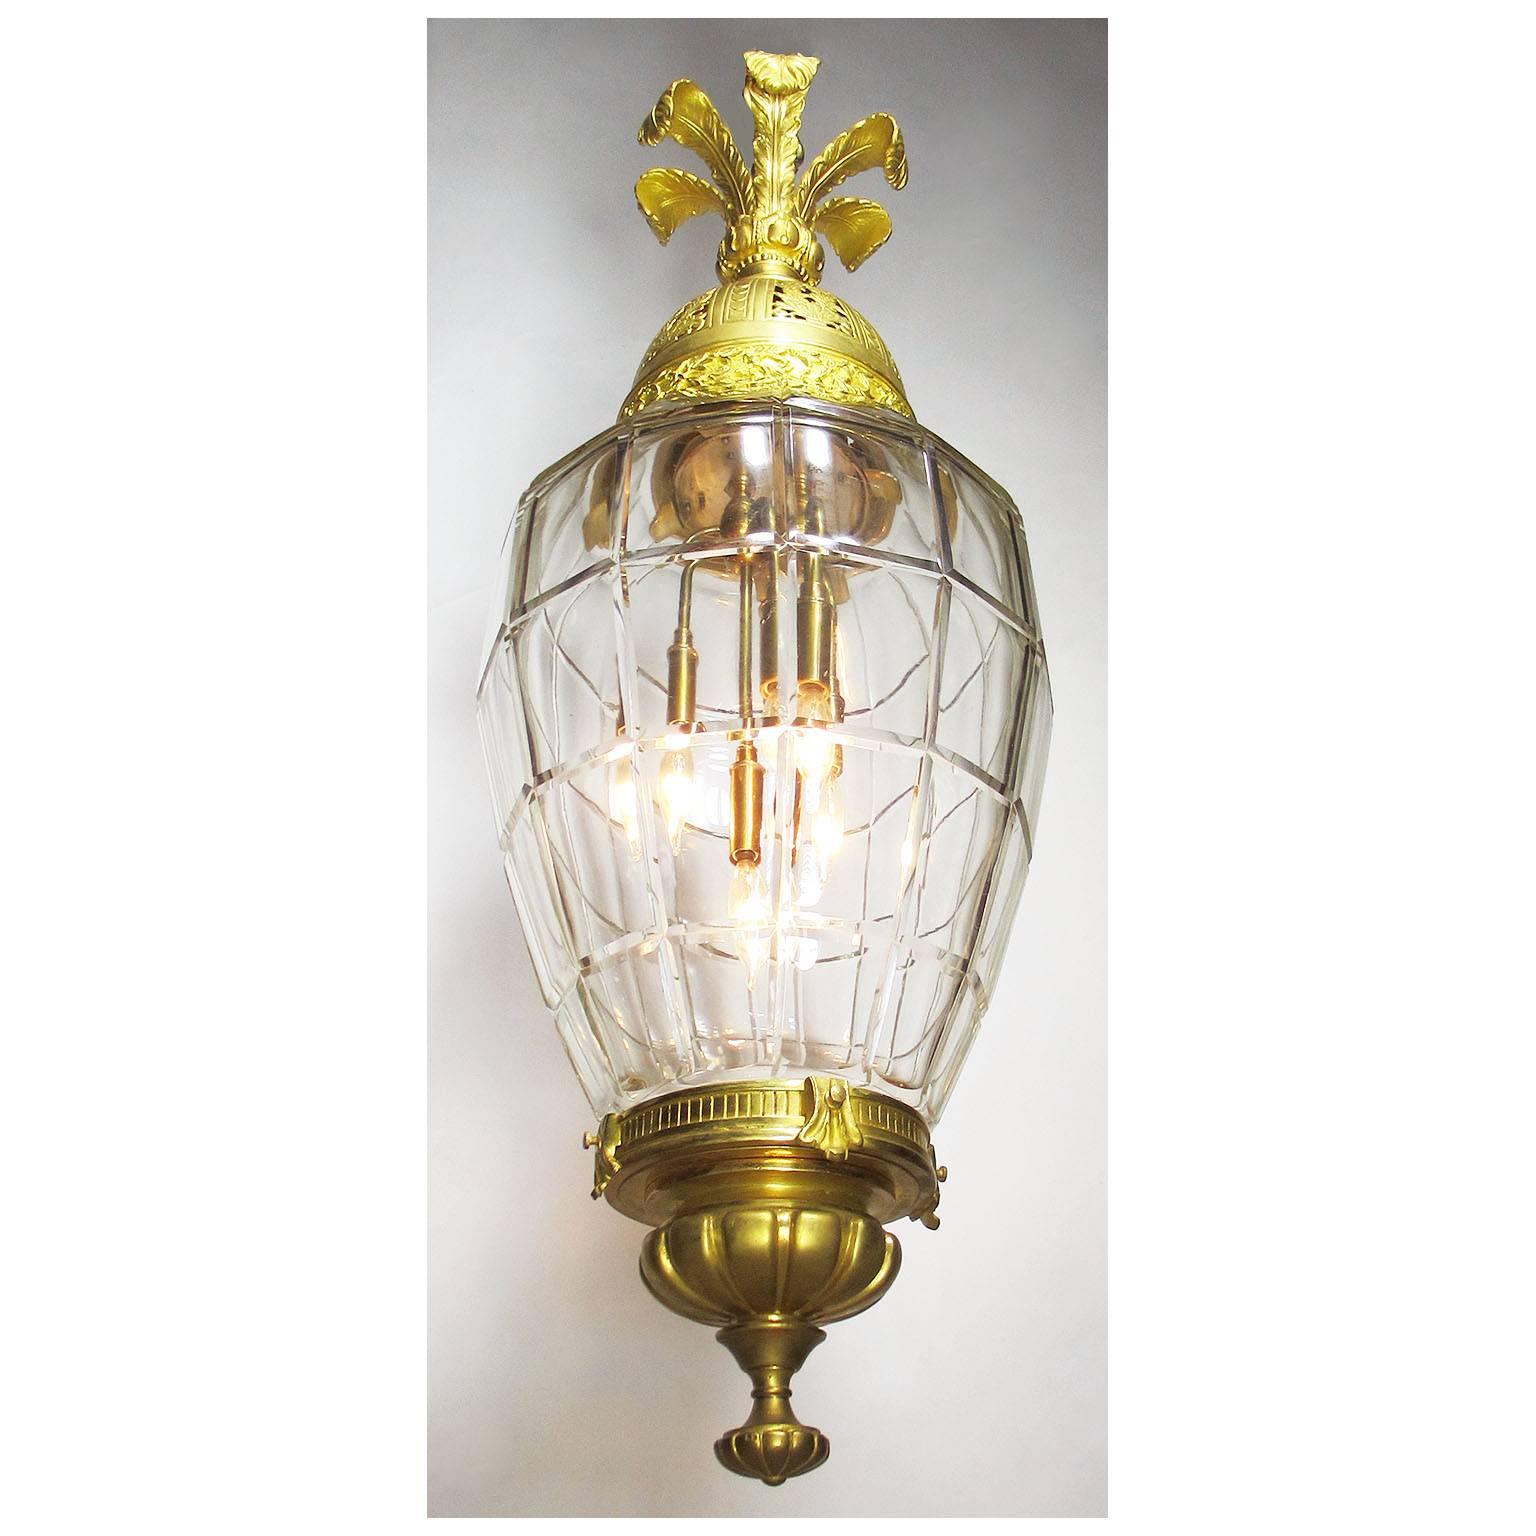 Gilt Fine French 19th-20th Century Belle ÉPoque Lantern, Attributed to Baccarat For Sale